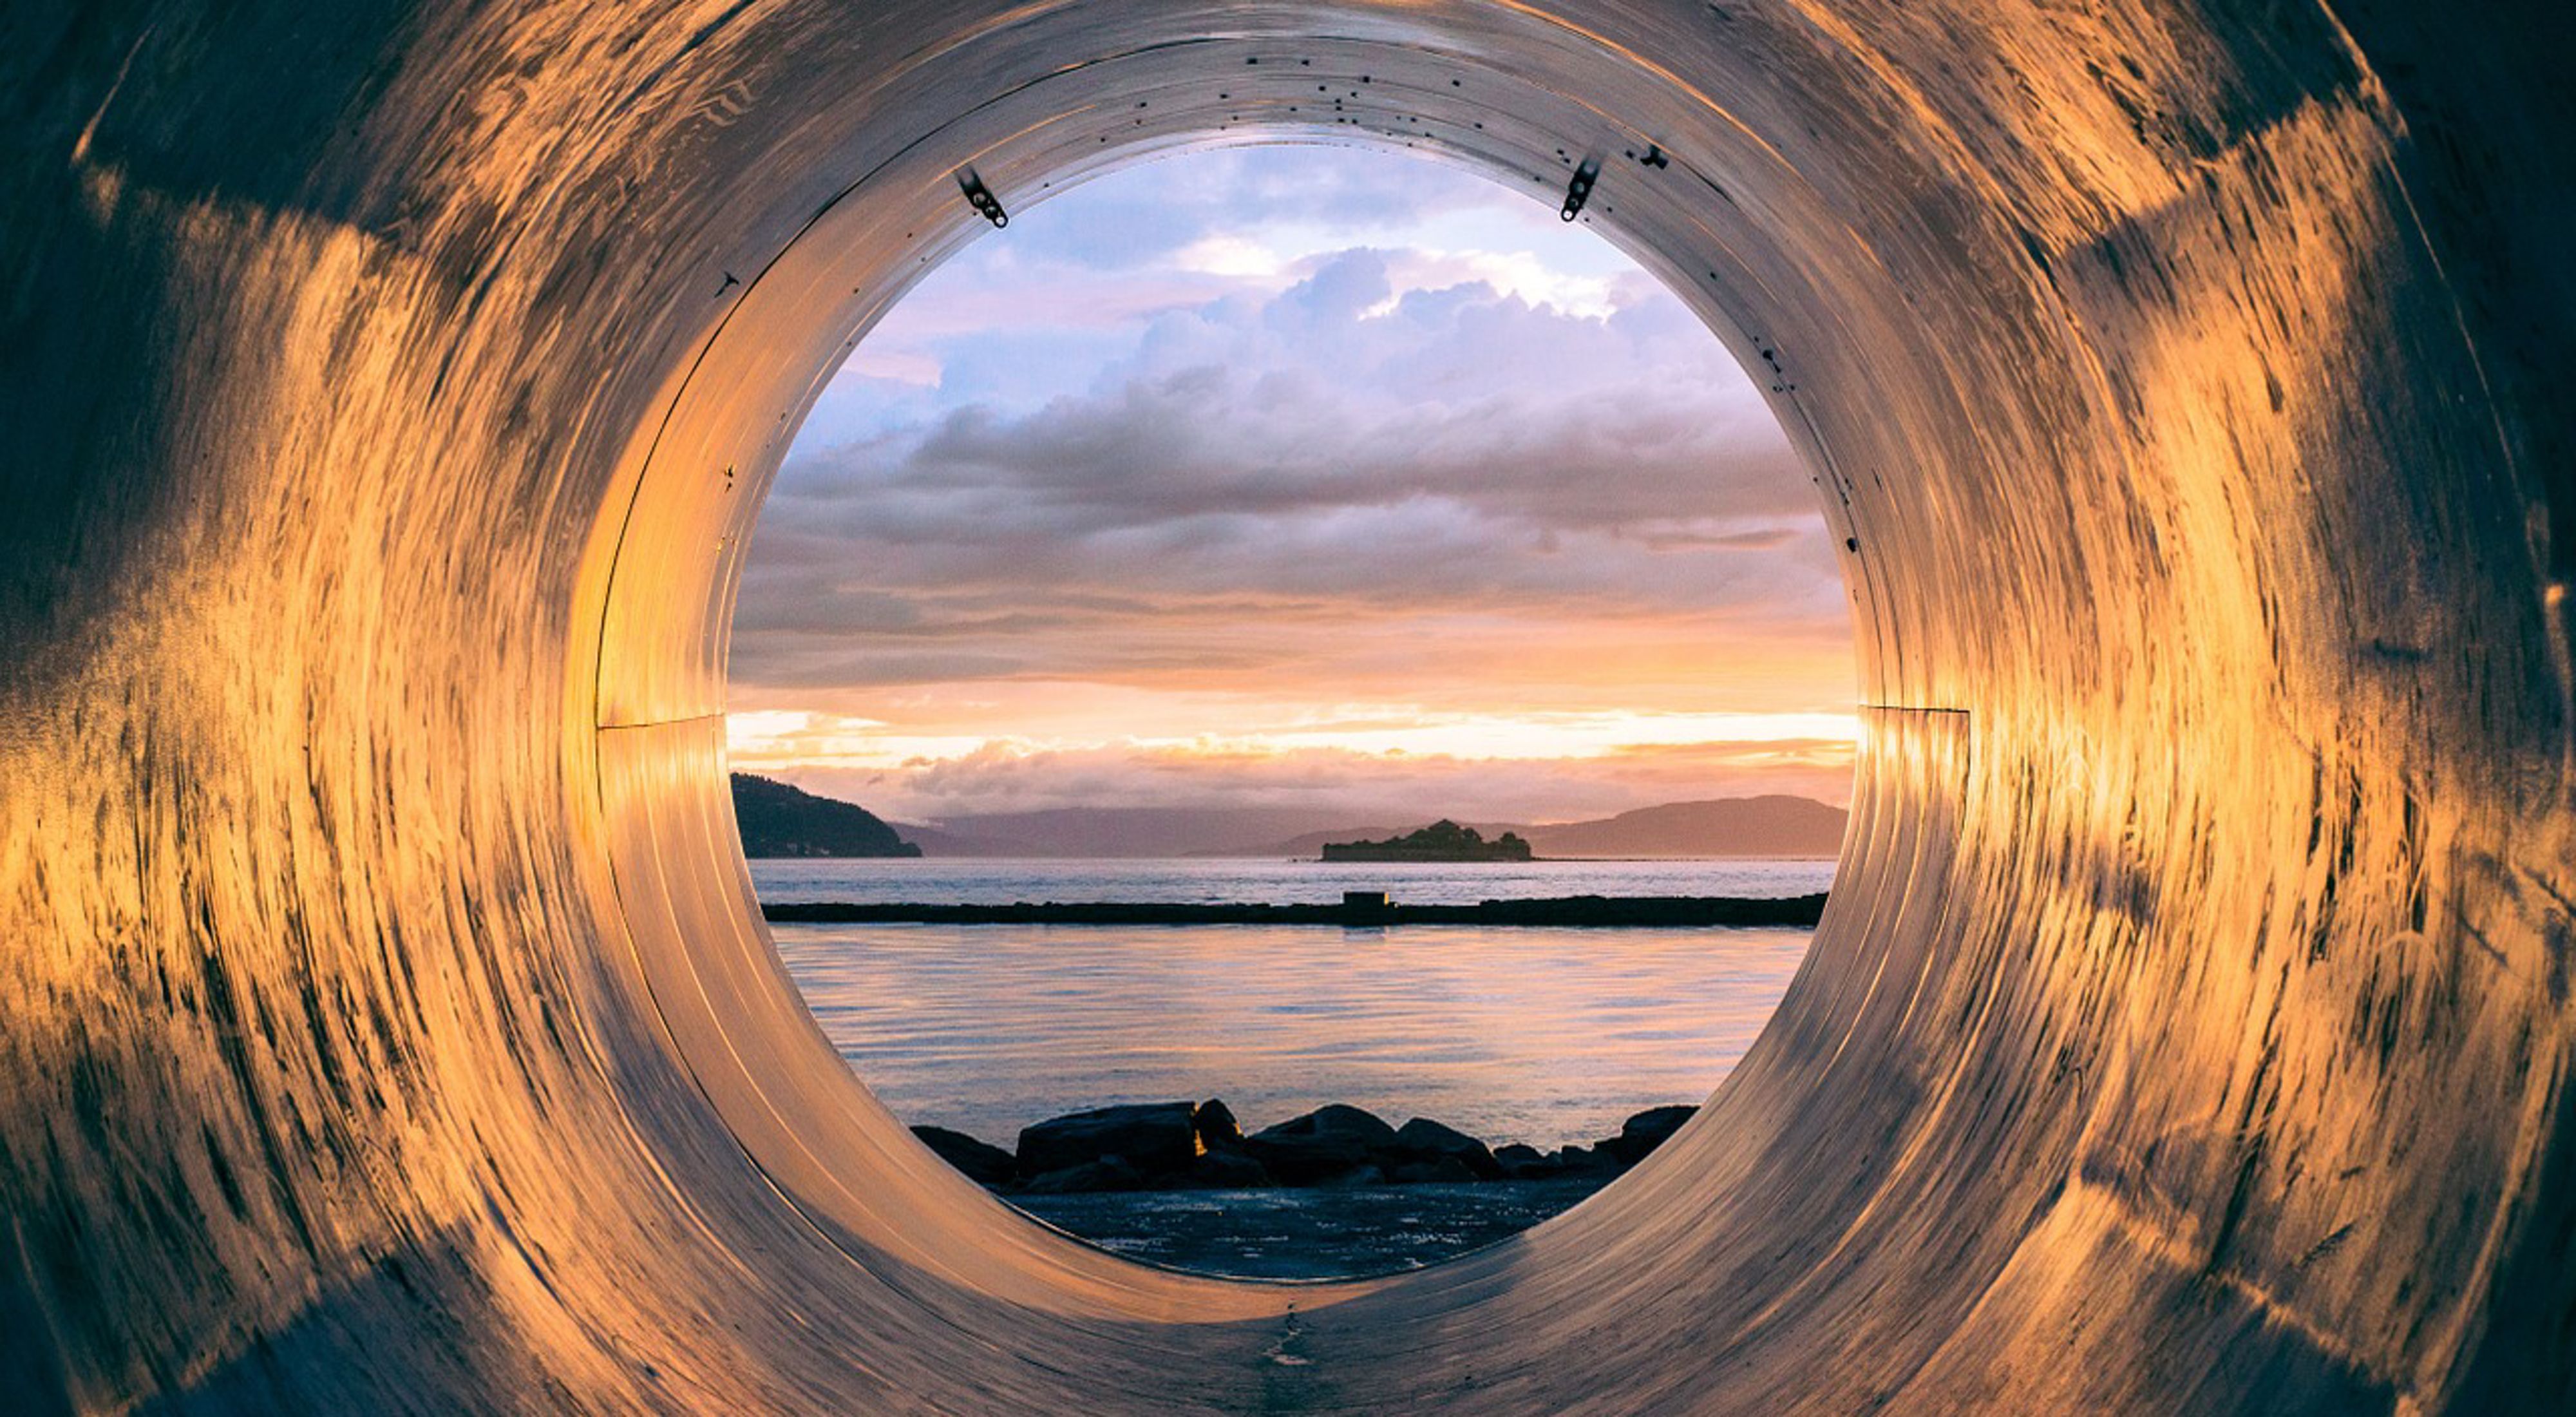 Sewage pipe with sunset in the background.